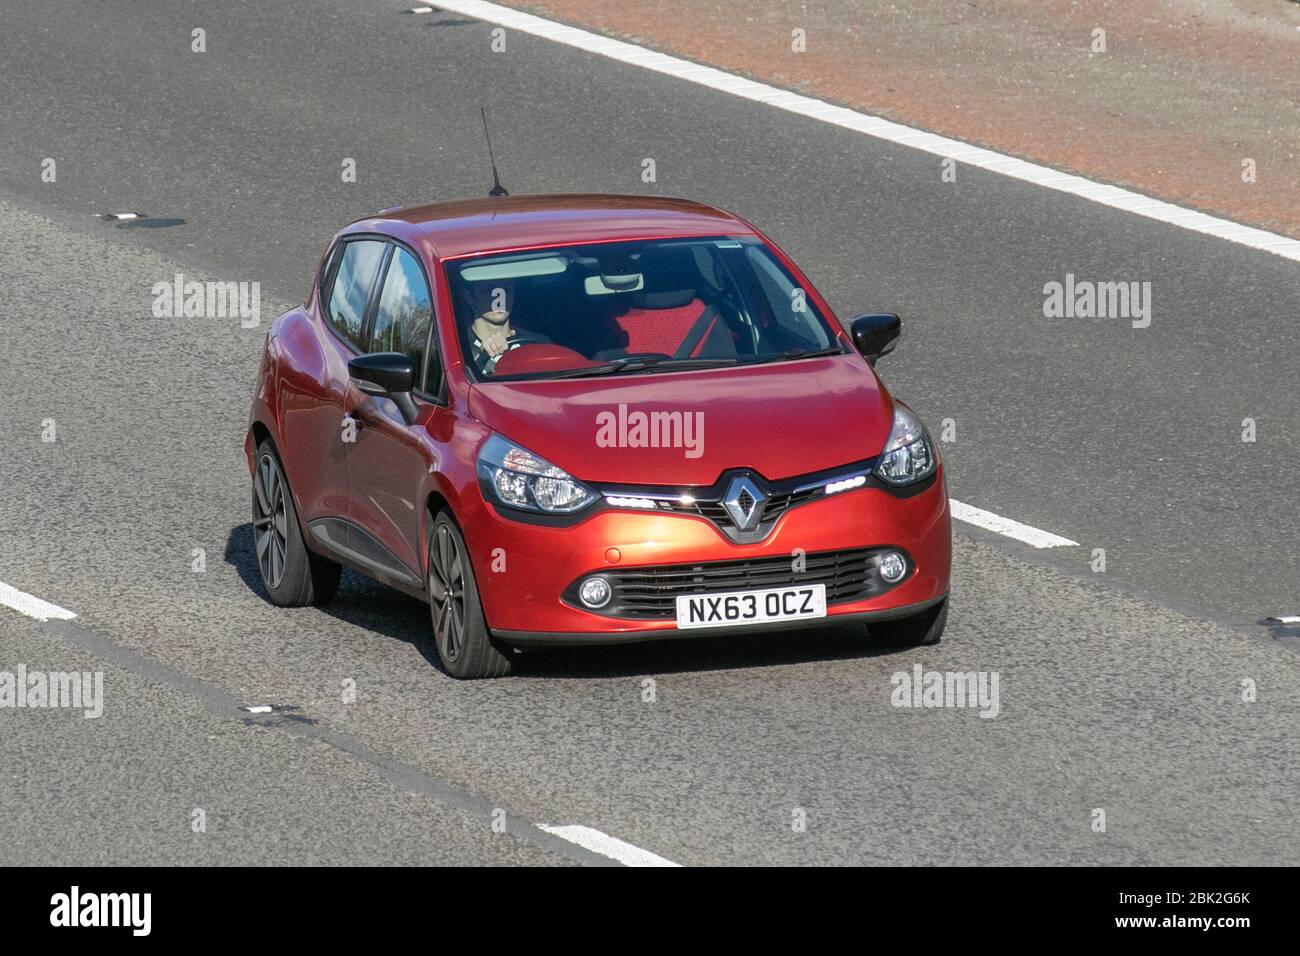 2013 red Renault Clio D-QUE S M-Nav NRG DC; Vehicular traffic moving vehicles, driving vehicle on UK roads, motors, motoring on the M6 motorway highway Stock Photo